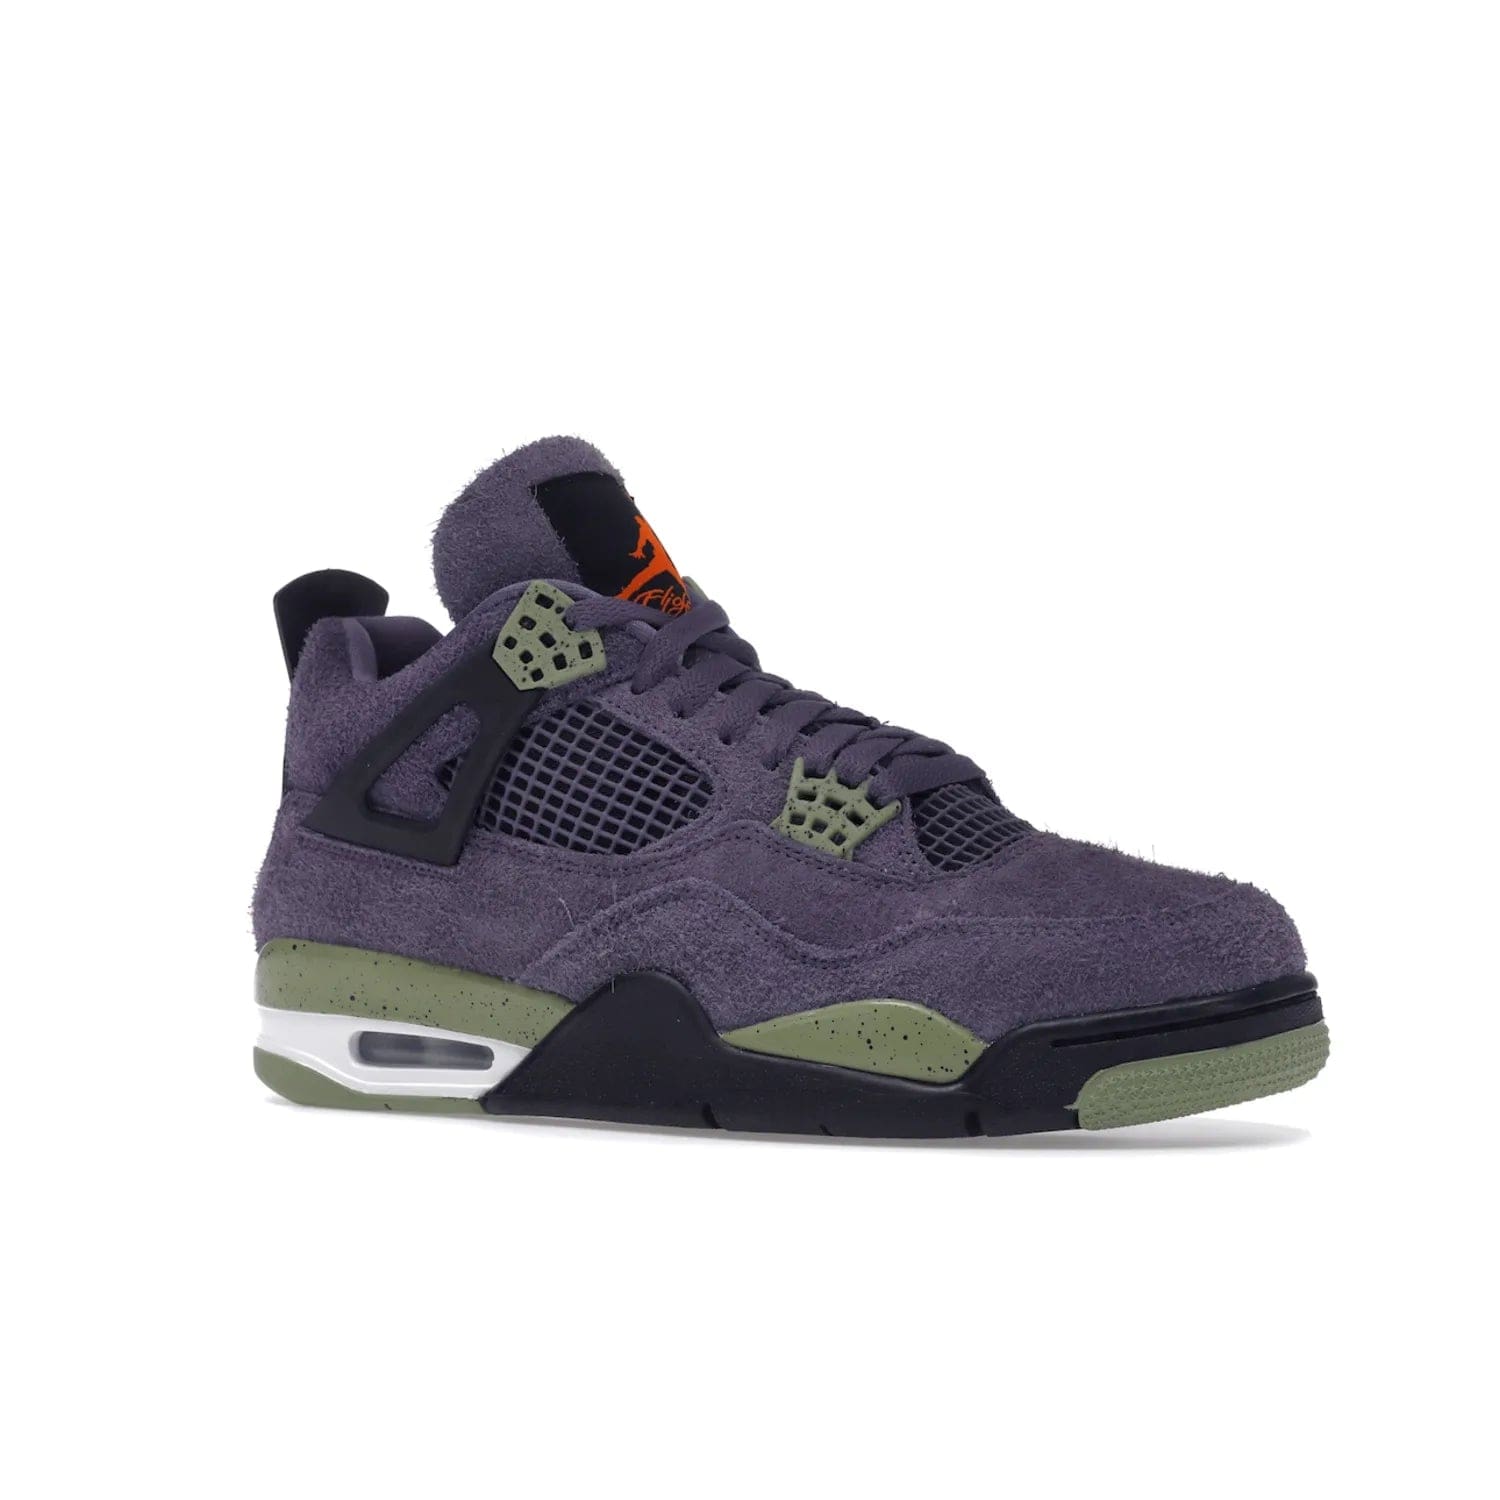 Jordan 4 Retro Canyon Purple (Women's) - Image 4 - Only at www.BallersClubKickz.com - New Air Jordan 4 Retro Canyon Purple W sneaker features shaggy purple suede, lime highlights & safety orange Jumpman branding. Classic ankle-hugging silhouette with modern colors released 15/10/2022.